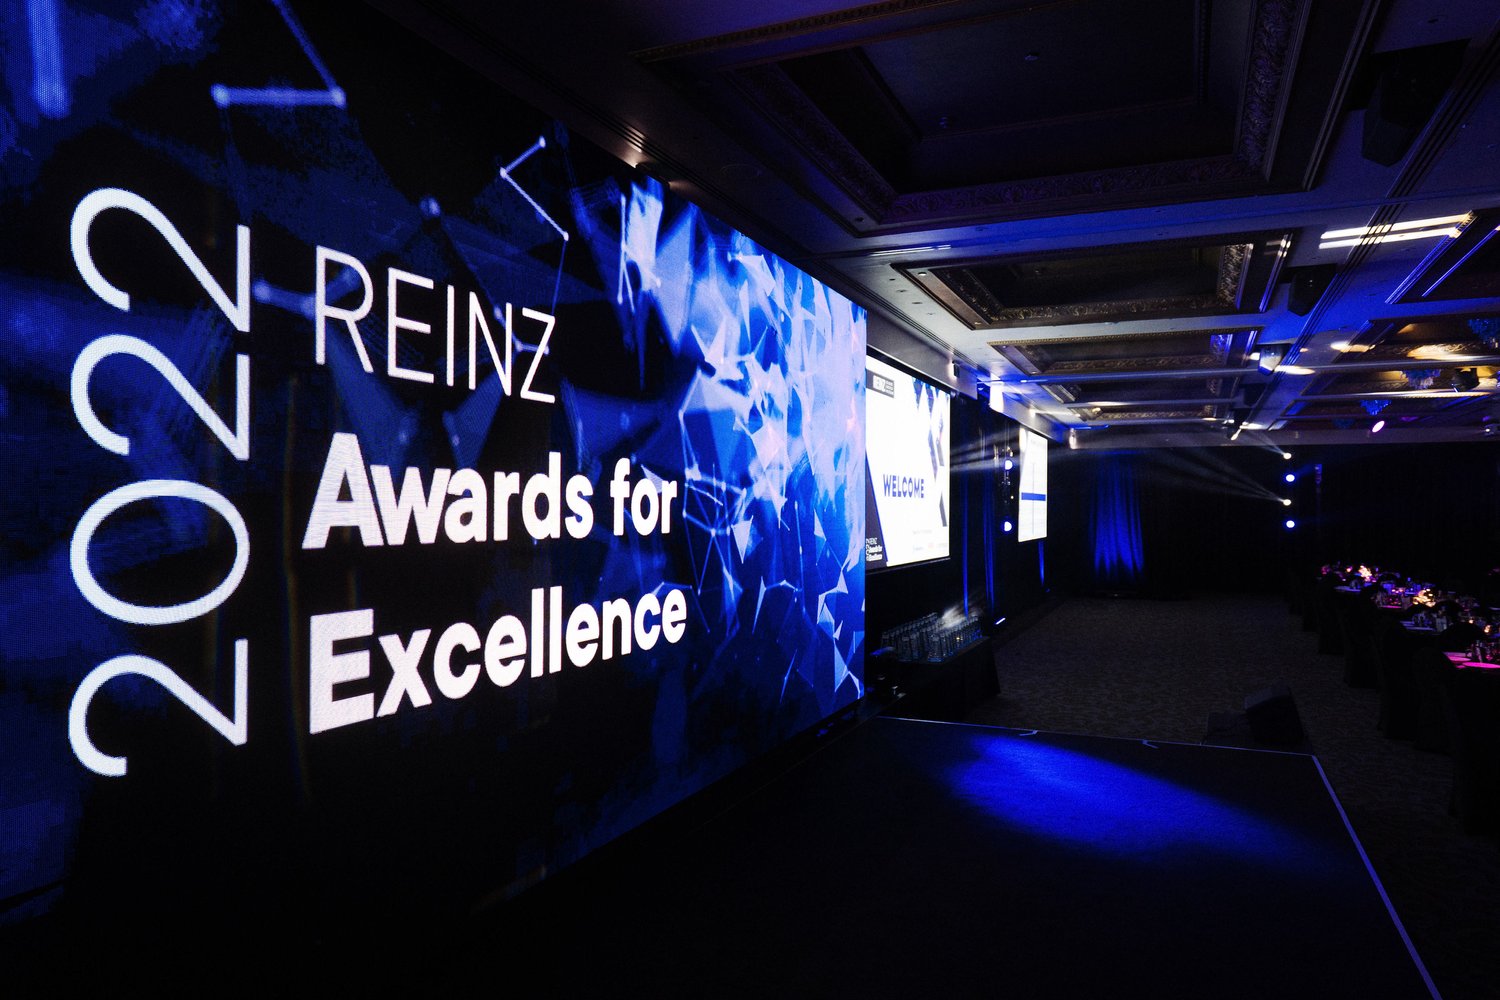 Winners of the 2022 REINZ Awards for Excellence